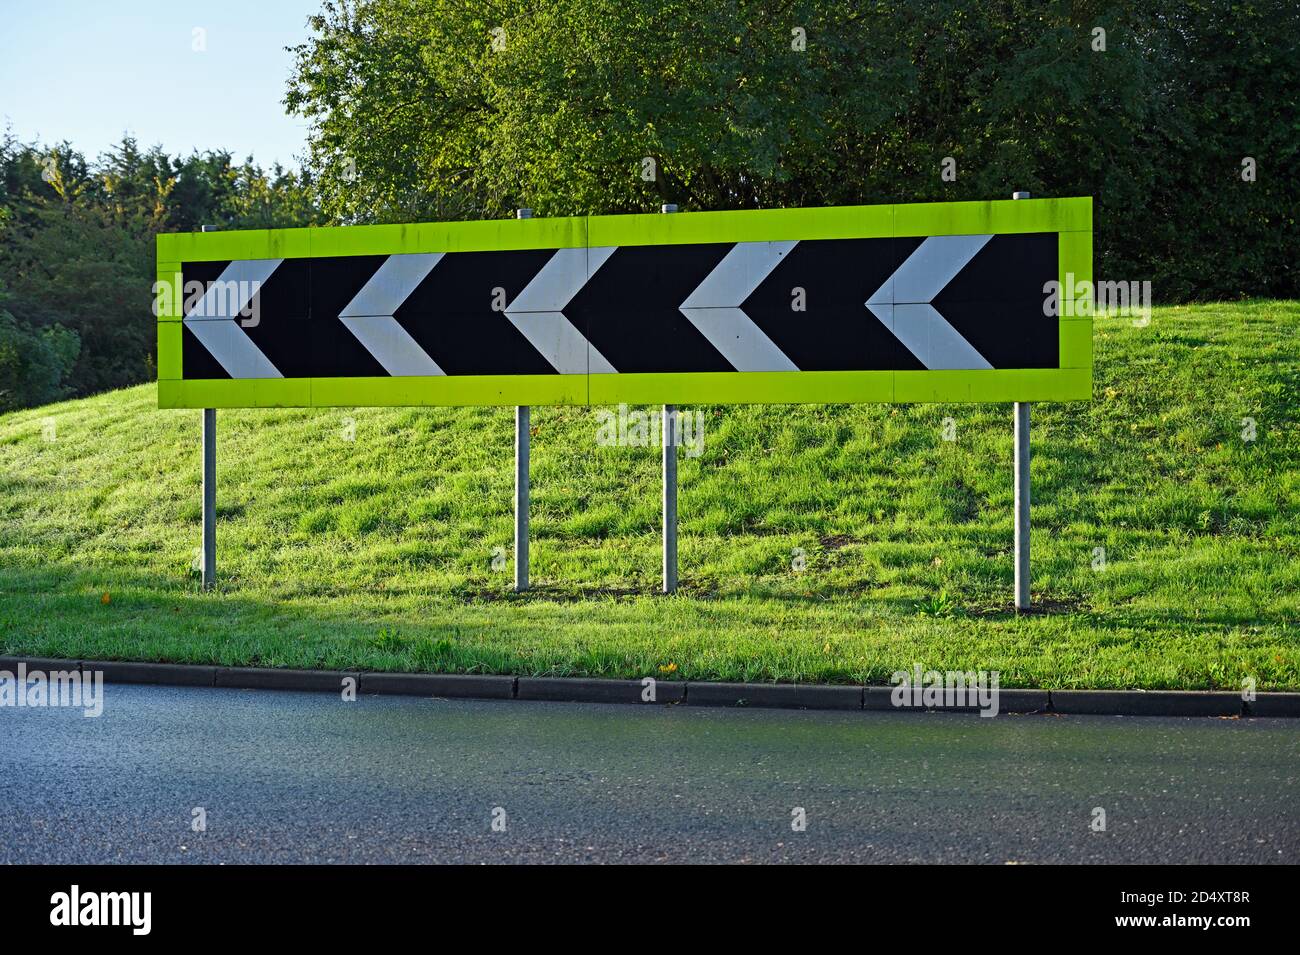 Directional road sign at Wickford, Essex comprising five white chevrons on a black background. Stock Photo